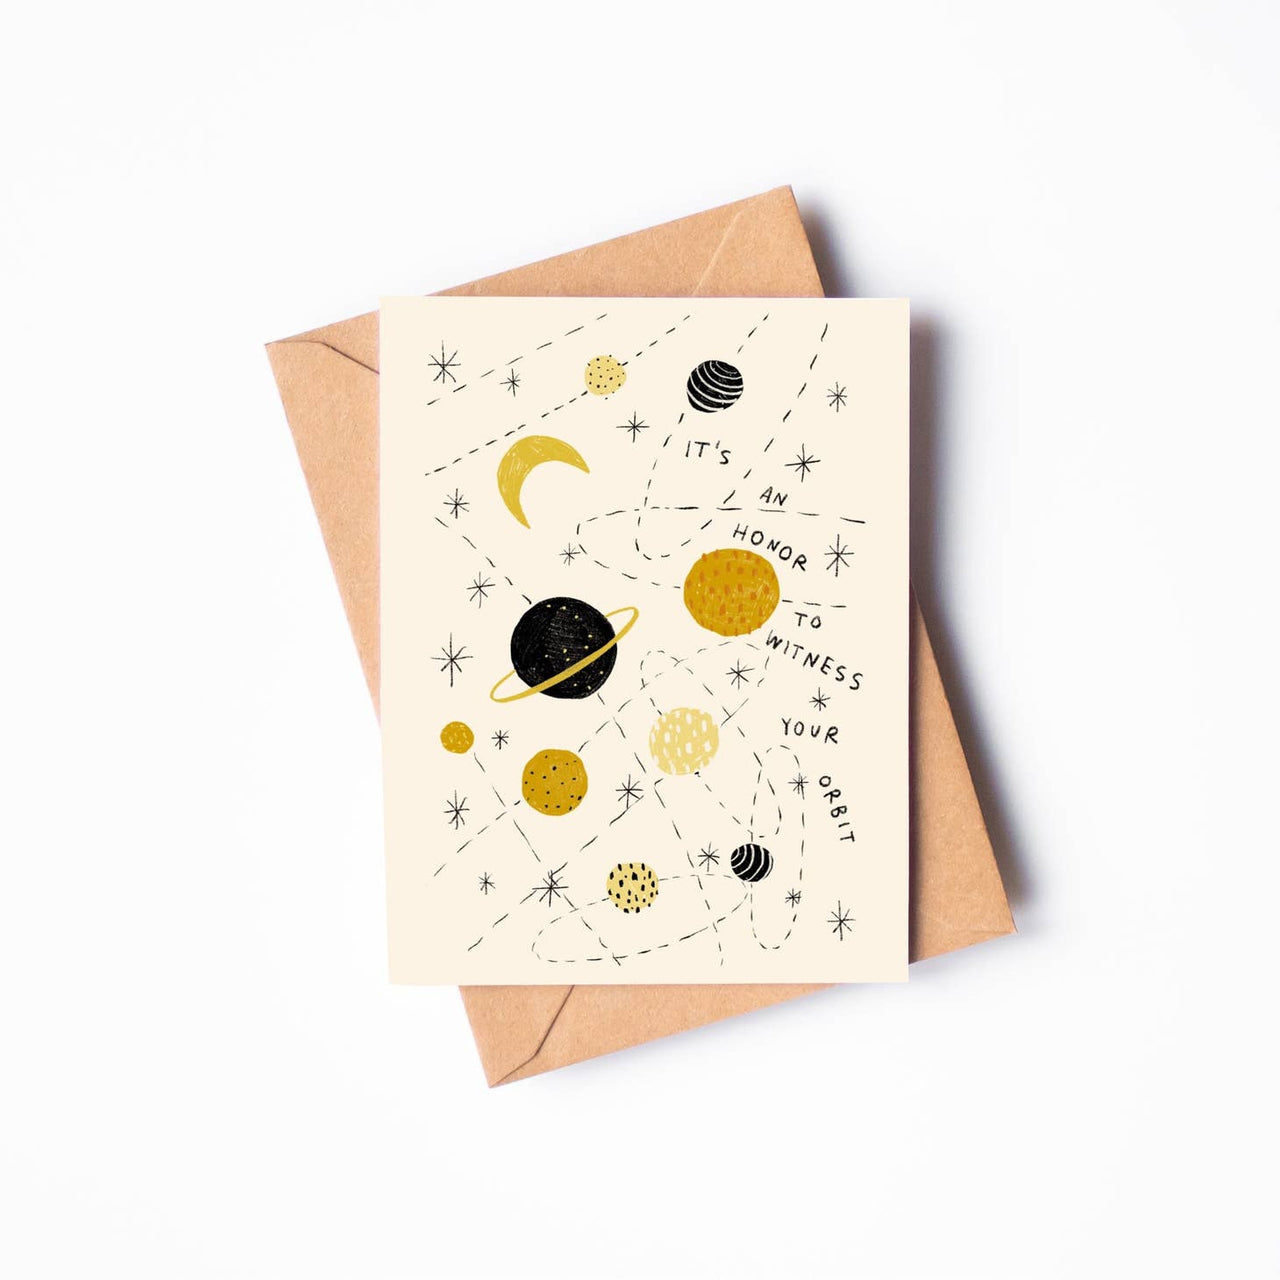 Rani Ban Co. - Greeting Card - It's An Honor To Witness Your Orbit